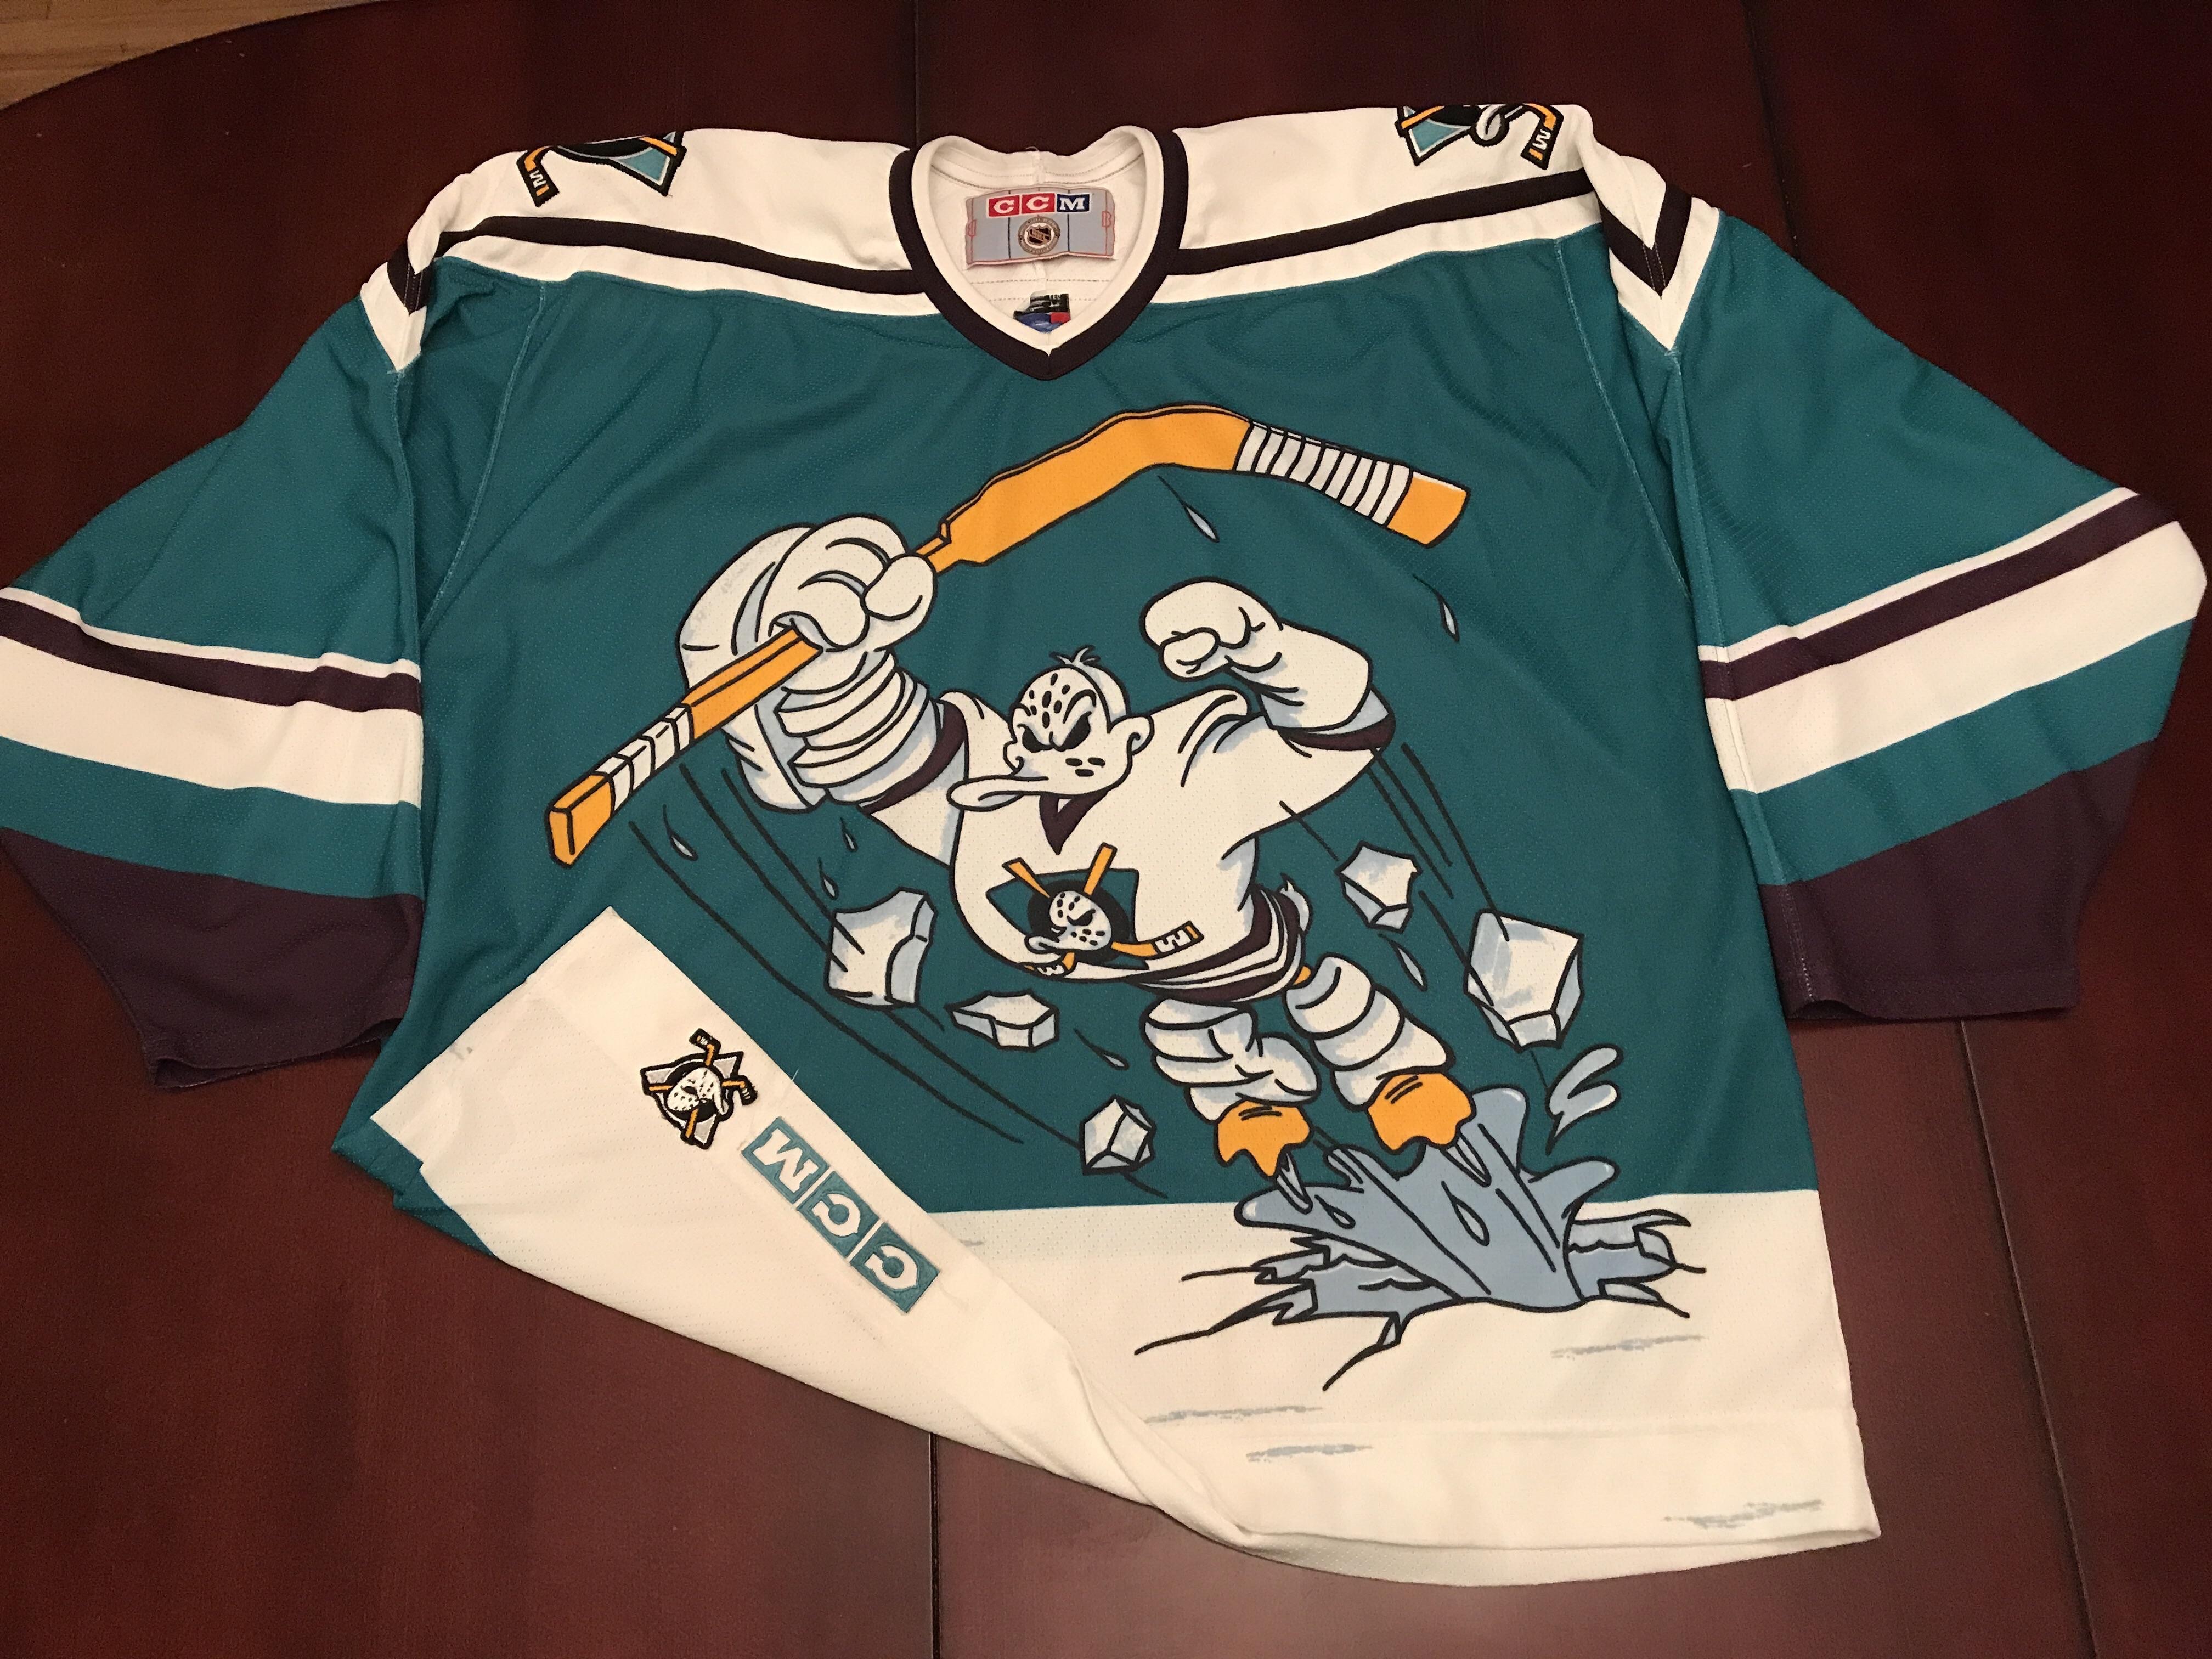 Wanted to post something different than a Ducks or Peyote jerseyfigured  this might stand out. : r/hockeyjerseys